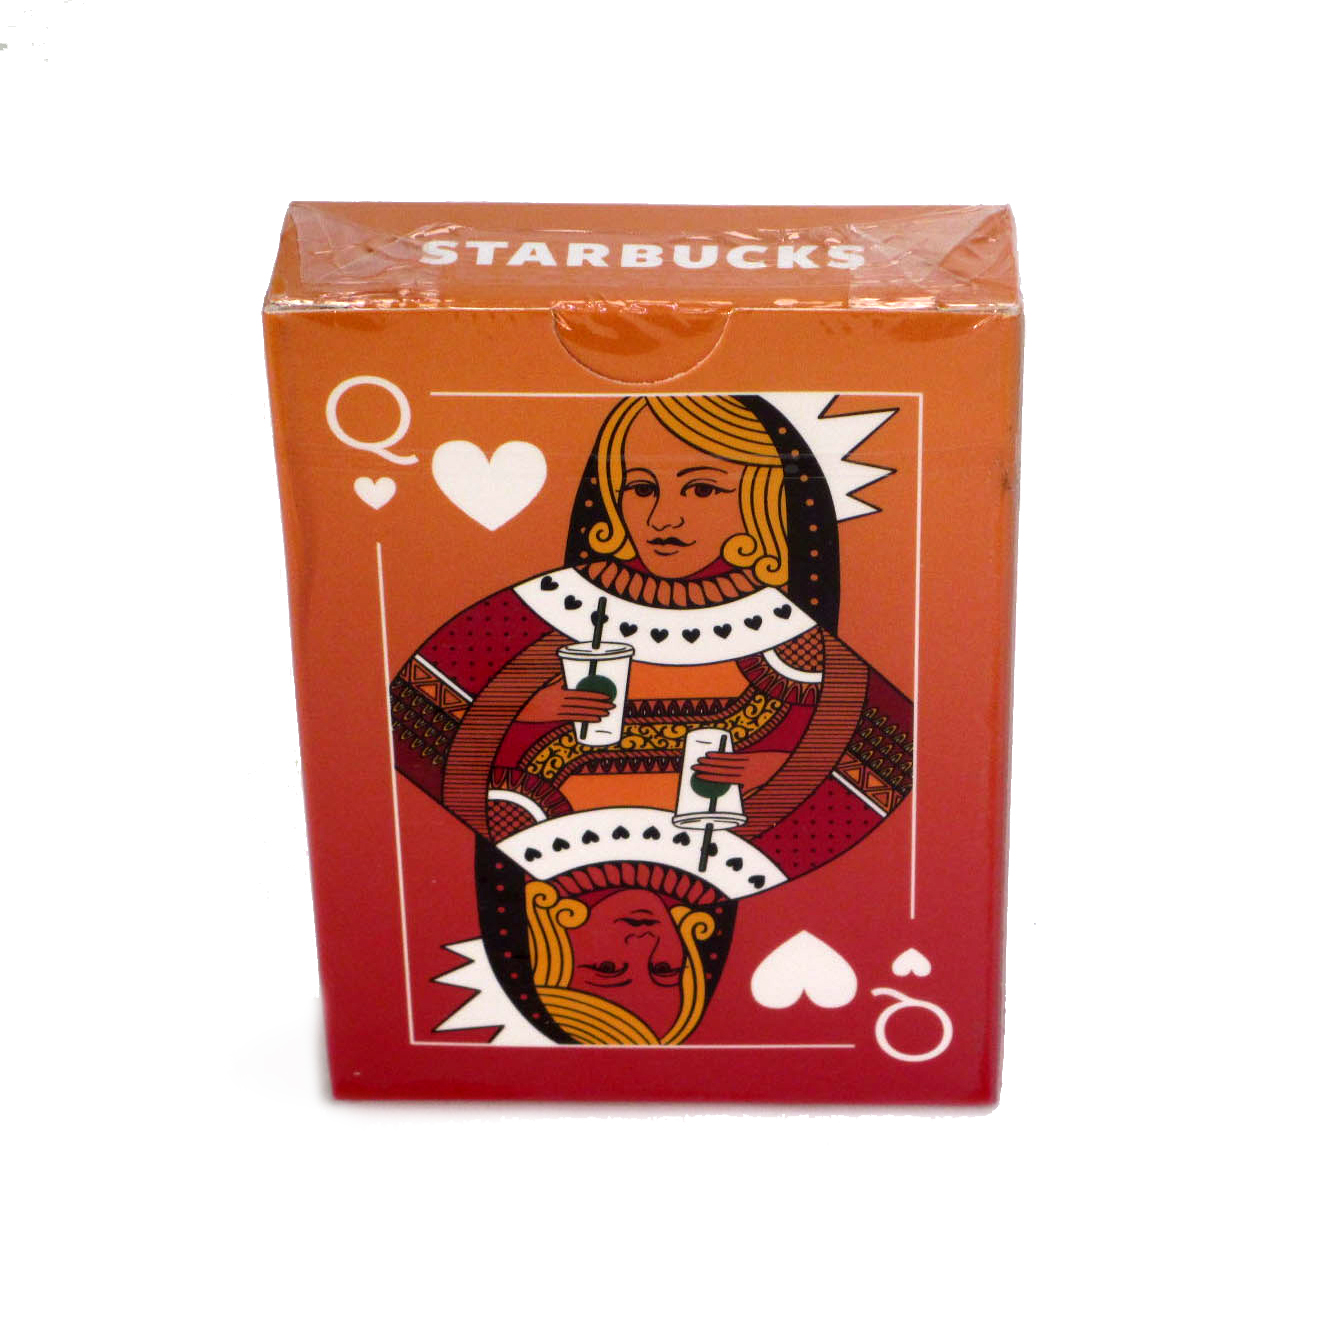 Playing card deck for Starbucks